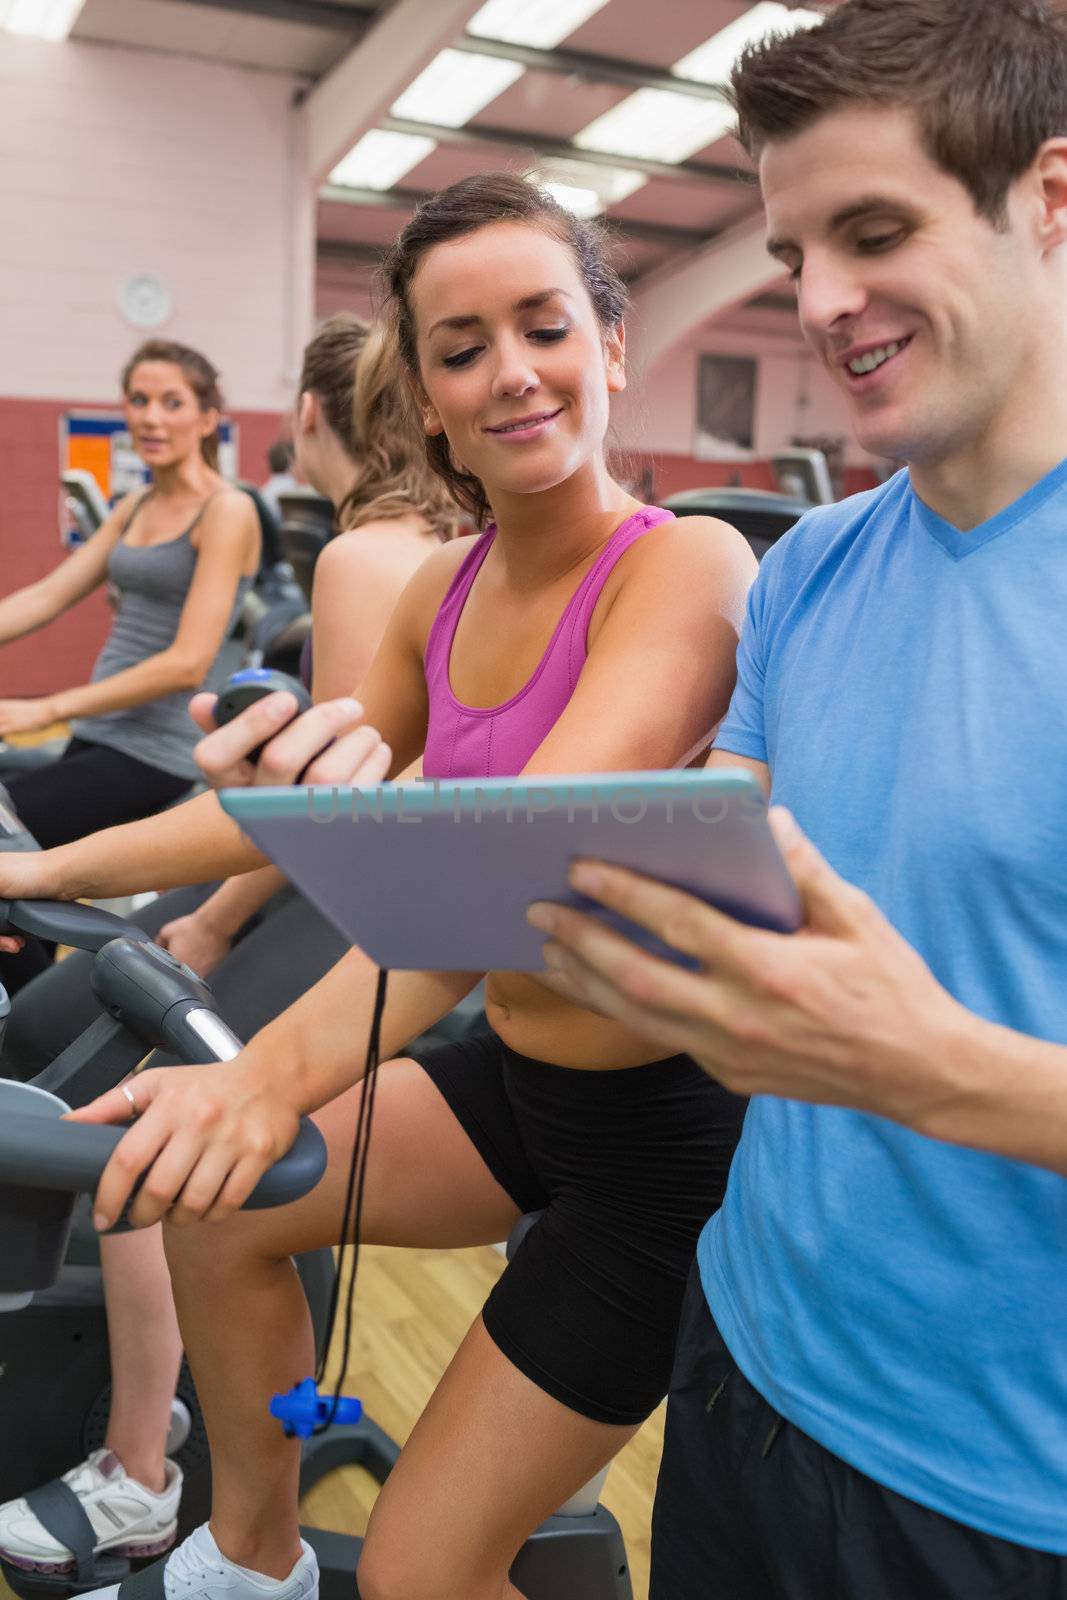 People chatting in gym on exercise bicycles